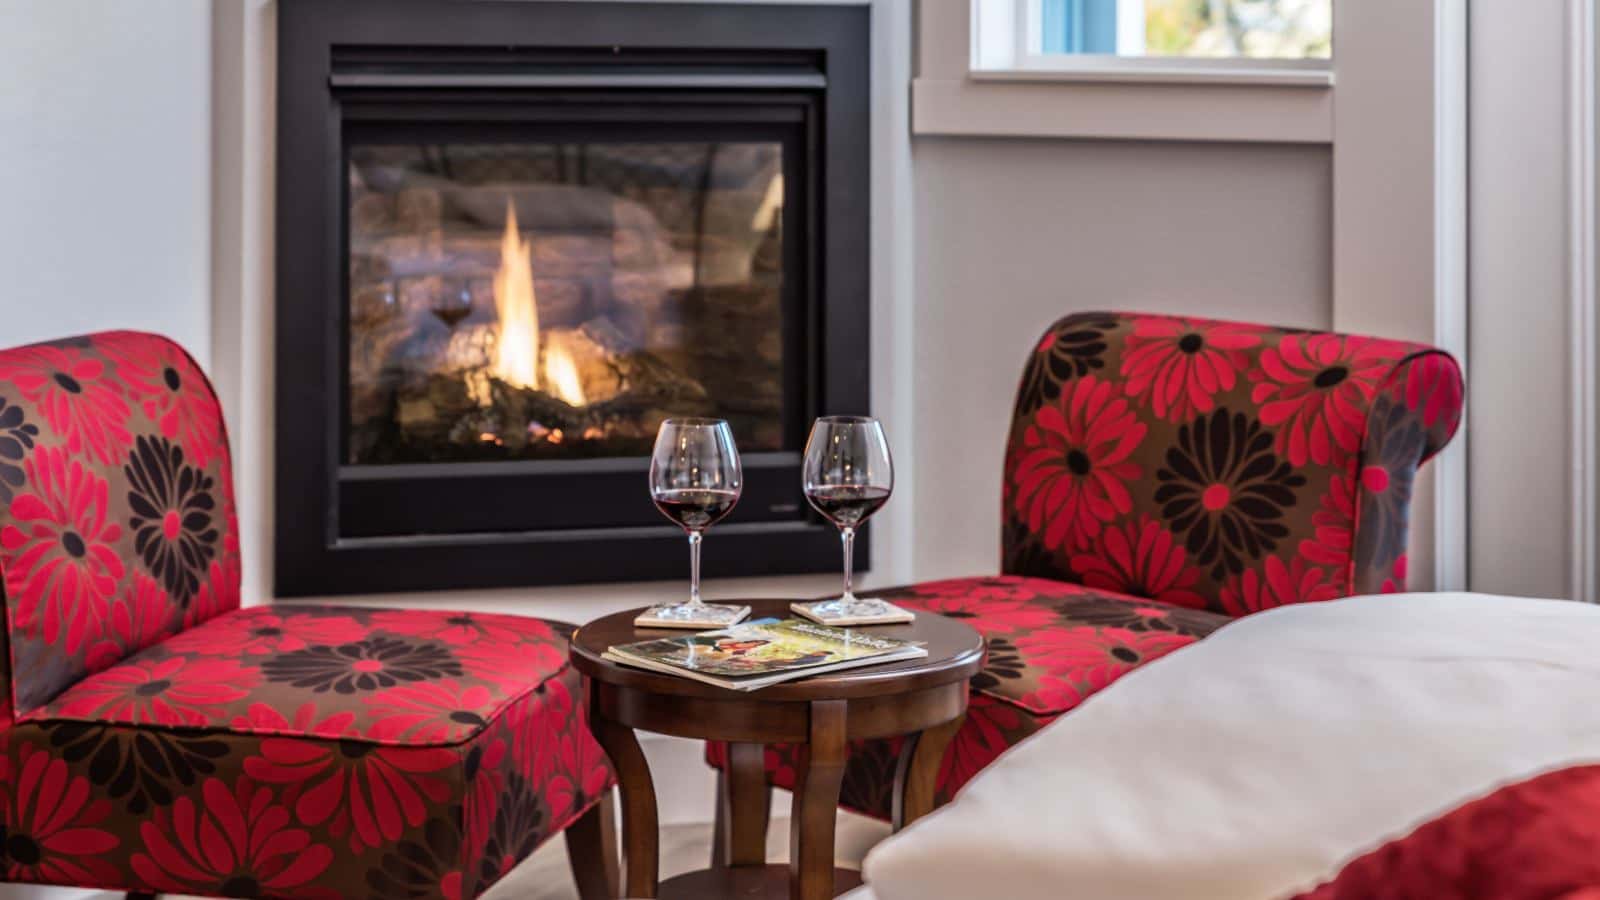 Close up view of two glasses of red wine on a small wooden table near two upholstered chairs with a red and black flower print and fireplace in the background